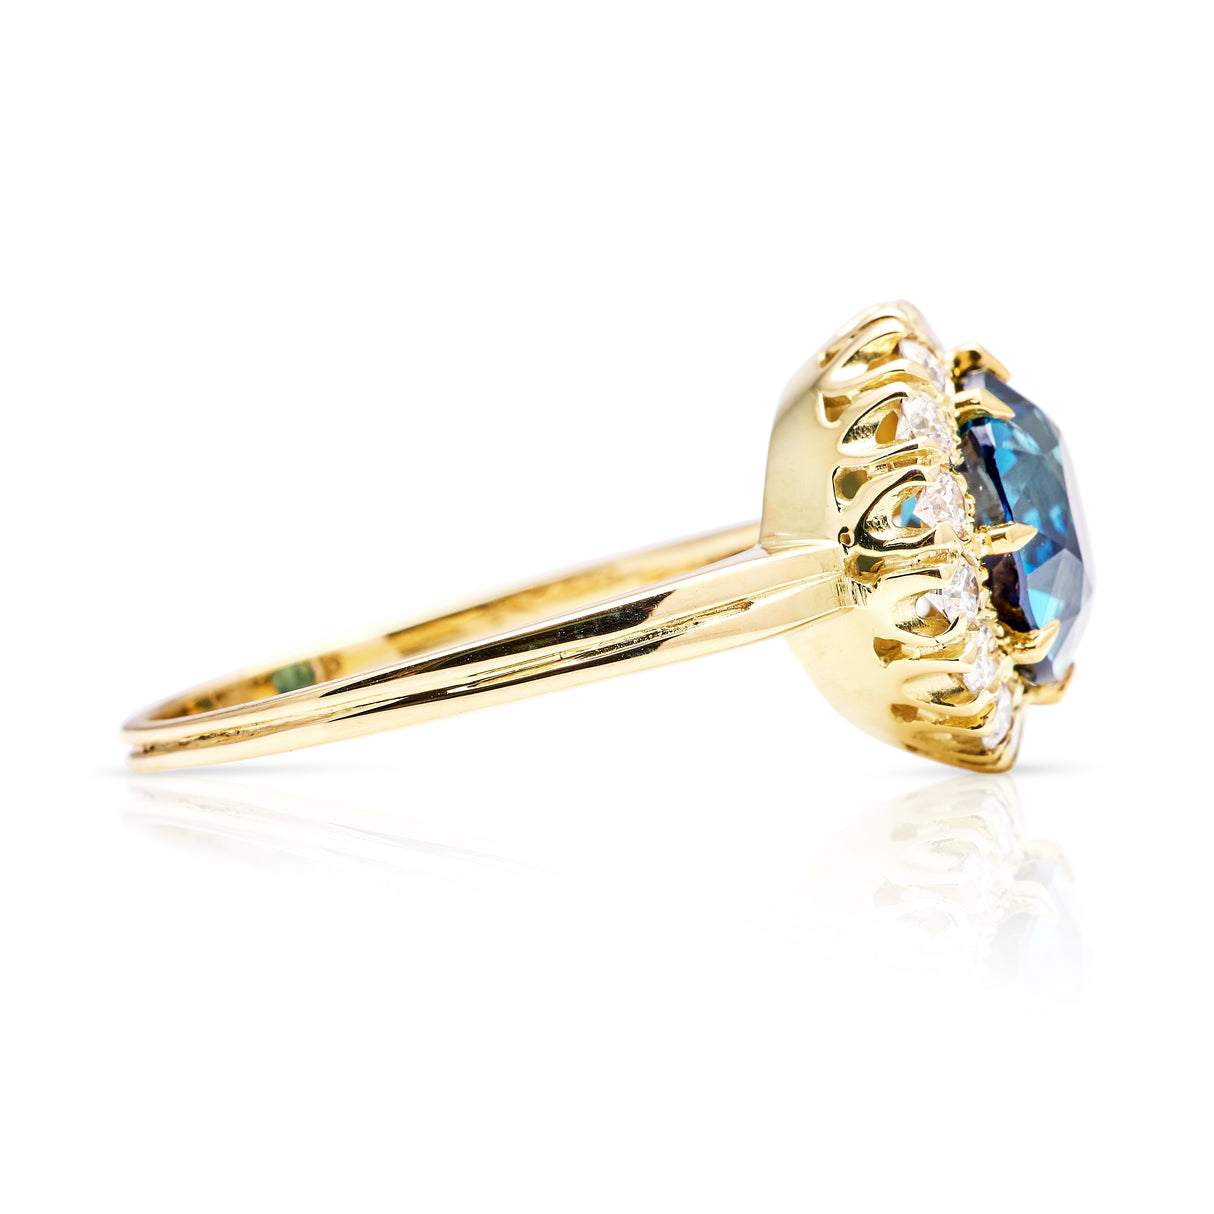 Vintage, teal blue sapphire and diamond cluster ring, 18ct yellow gold